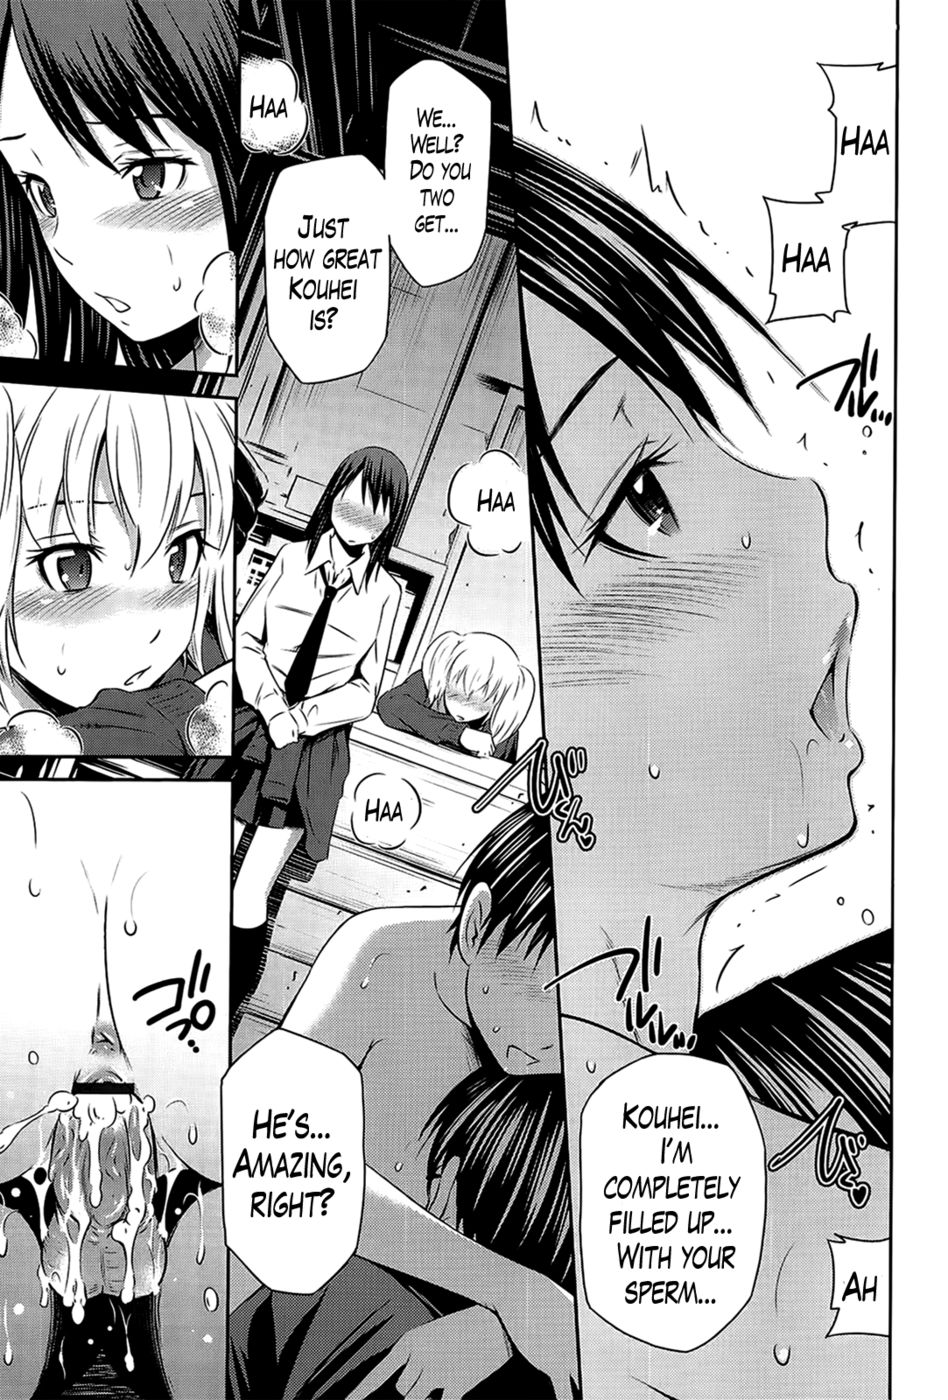 Hentai Manga Comic-A Very Hot Middle-Chapter 1-Narumi's Bragging About Her Boyfriend-29